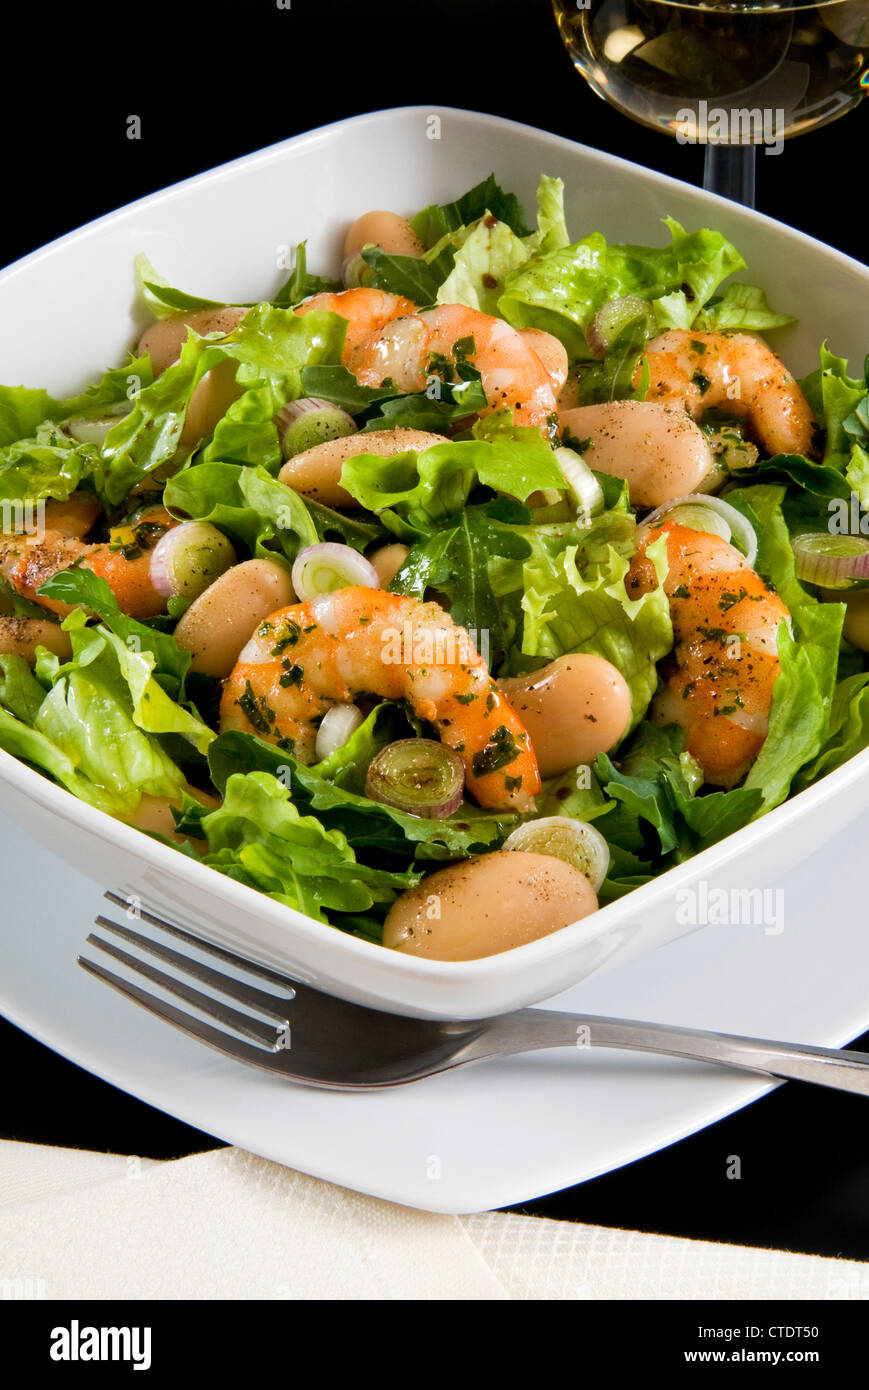 Salad with shrimp, white beans, onions and arugula with balsamic vinegar Stock Photo